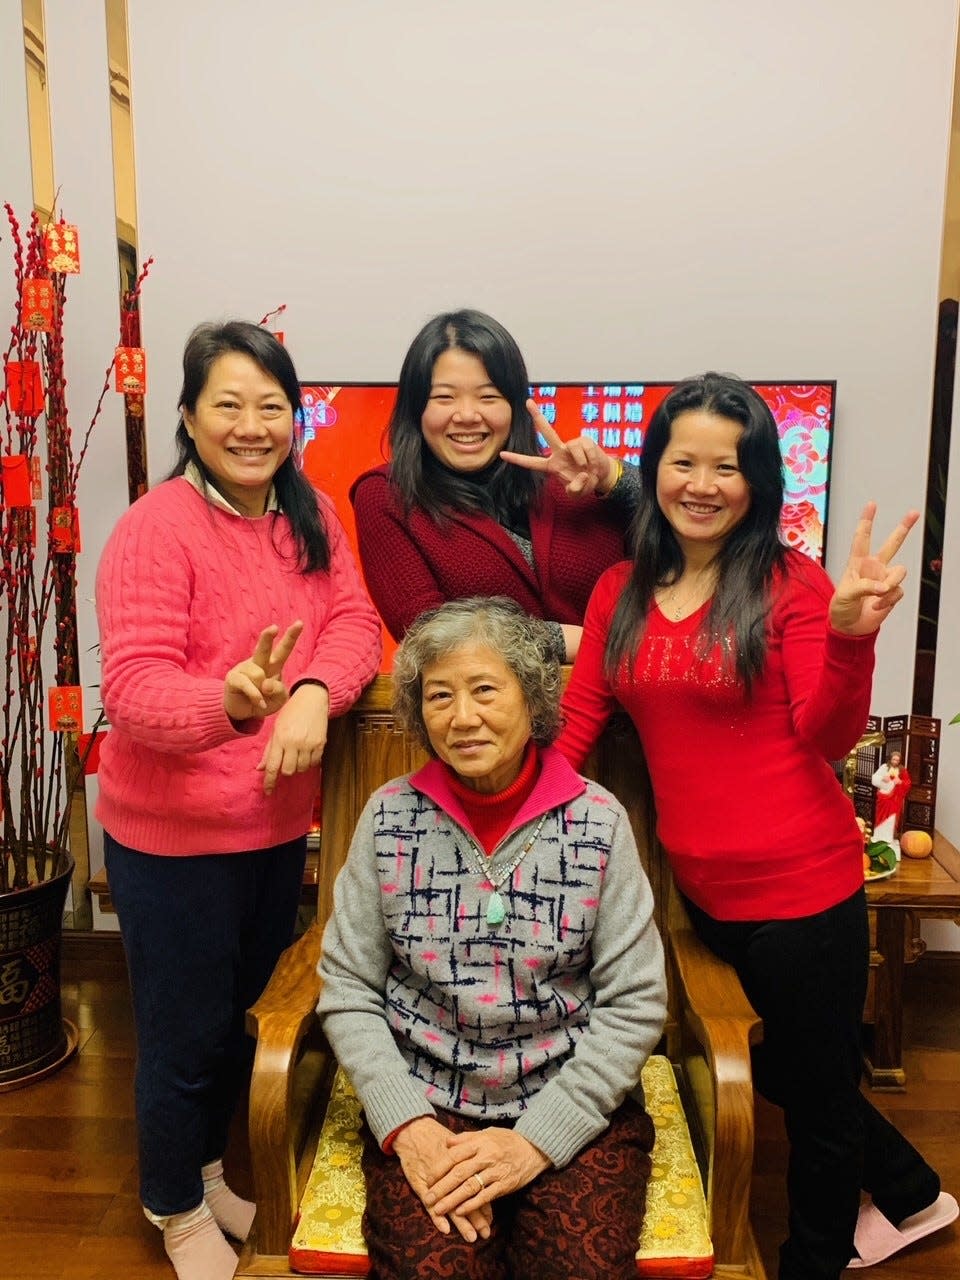 Xiaojie Tan (right) traveled to China last year to celebrate the Chinese New Year with her mom, sister and niece.